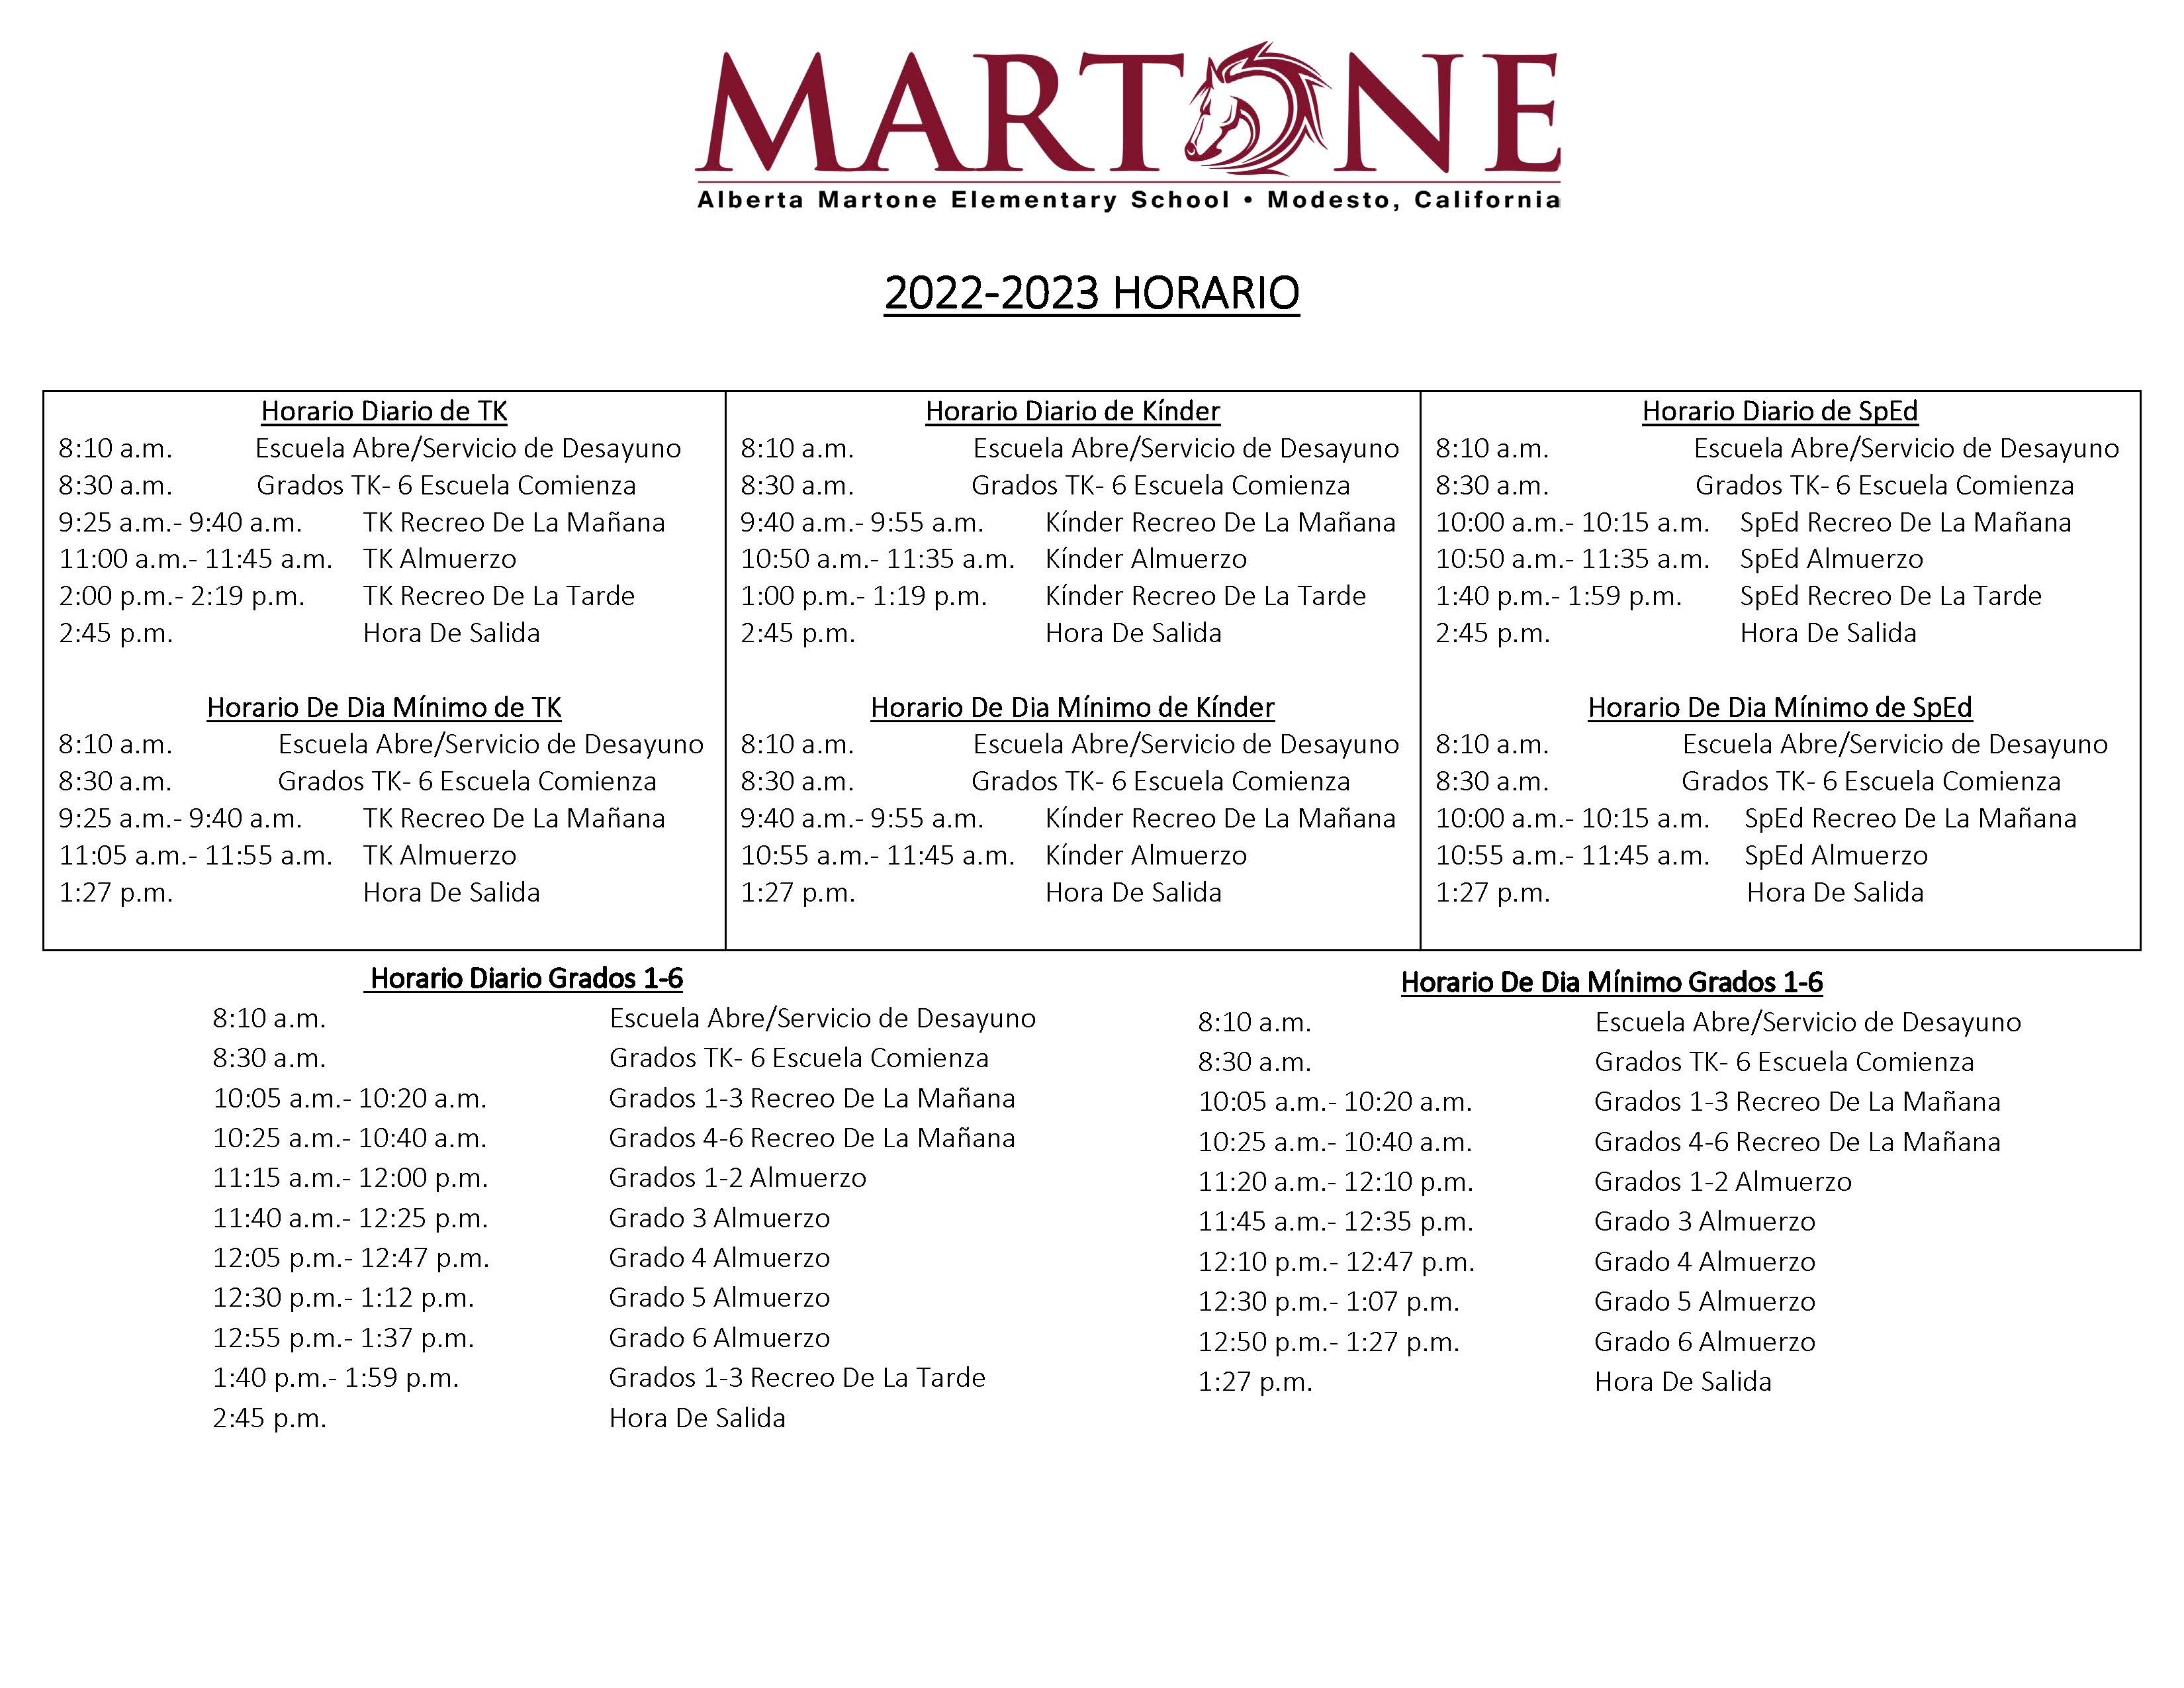 image of bell schedule in Spanish